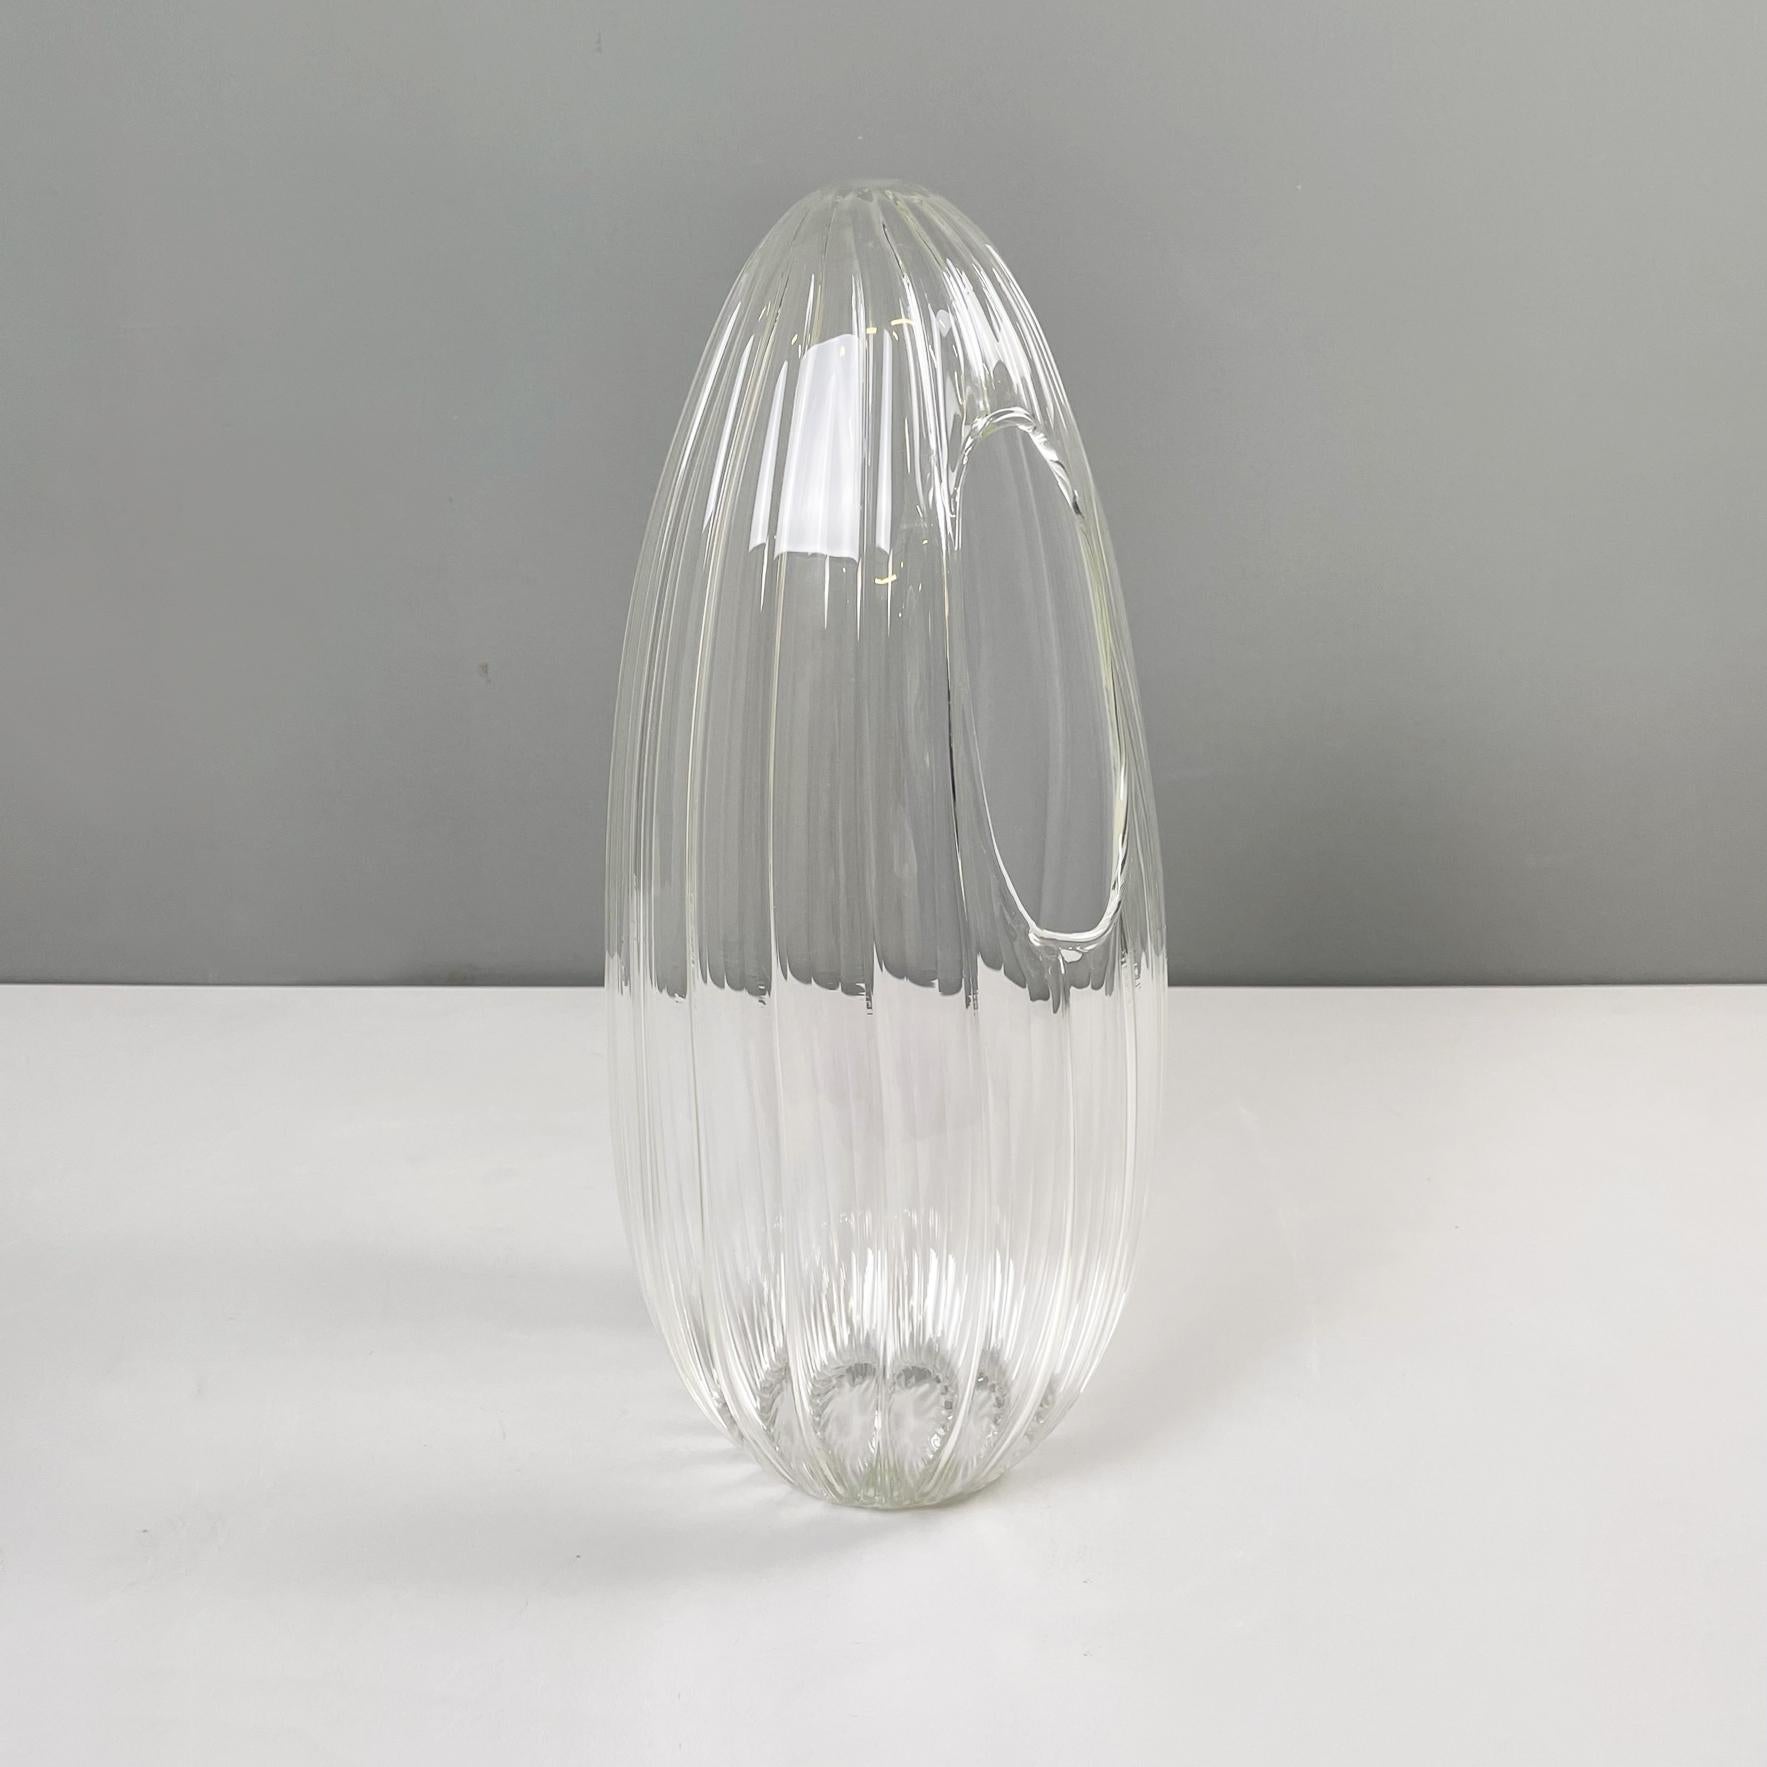 Italian modern Glass vase with round seed shape by Roberto Faccioli, 1990s
Round base vase in finely handcrafted glass. The oval structure resembles the shape of a seed. The vase has the hole on the side.
Designed and produced by Roberto Faccioli in